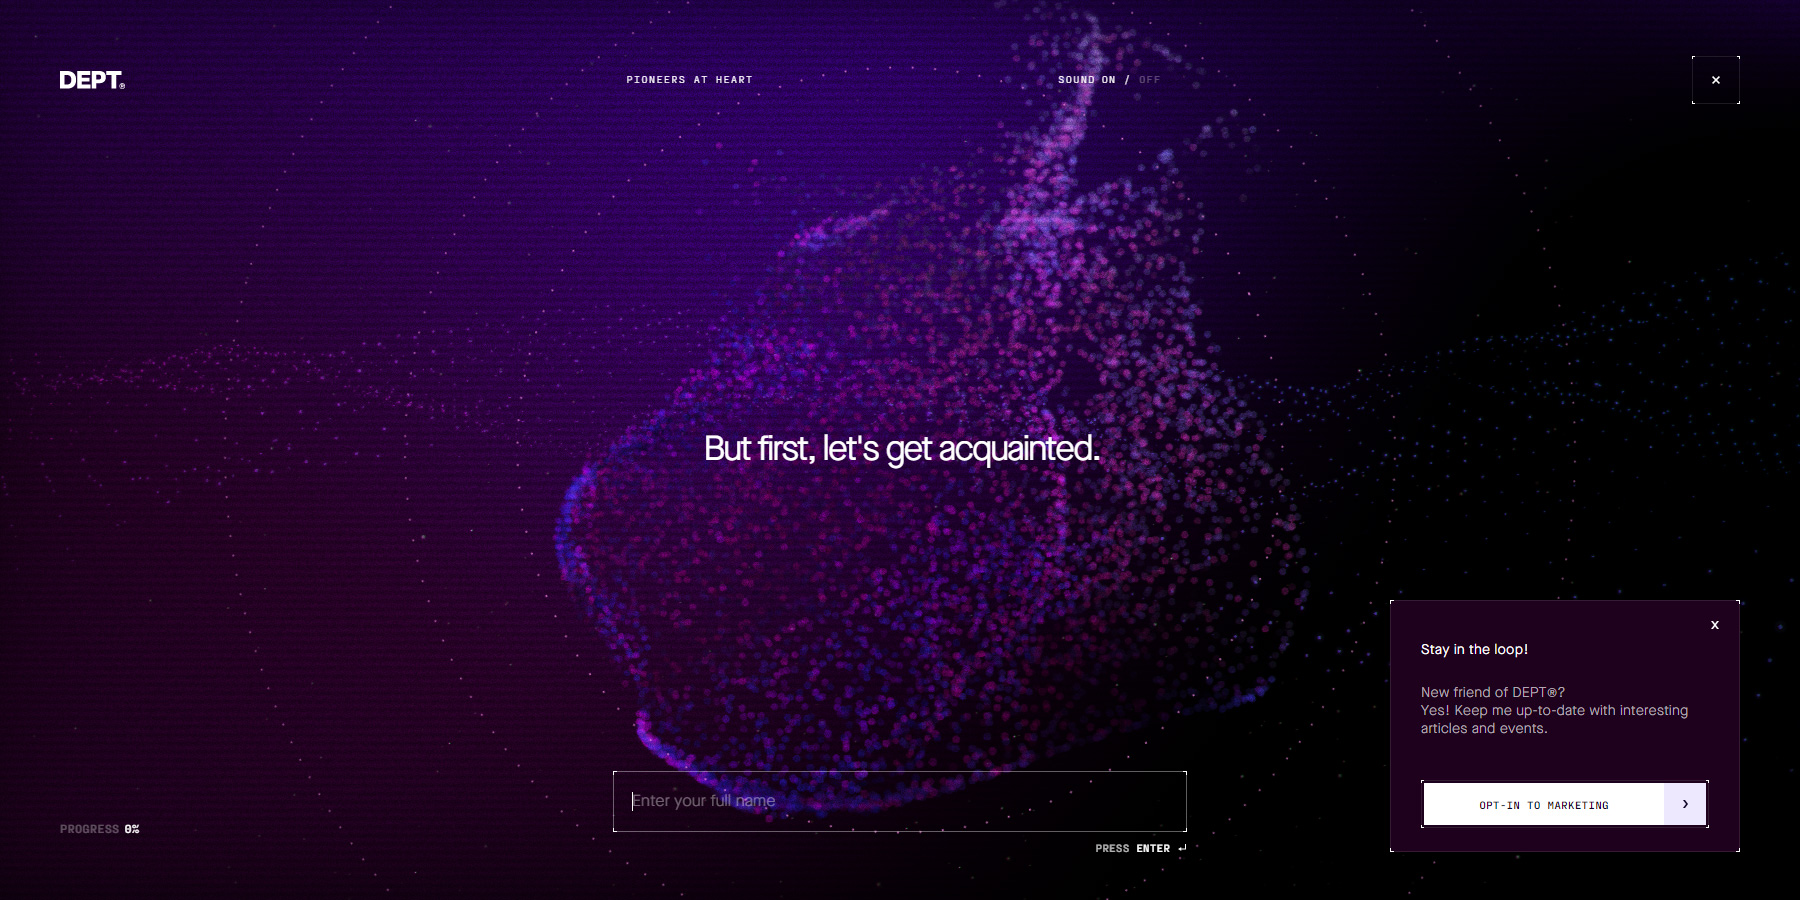 Prepare to Pioneer - Website of the Day